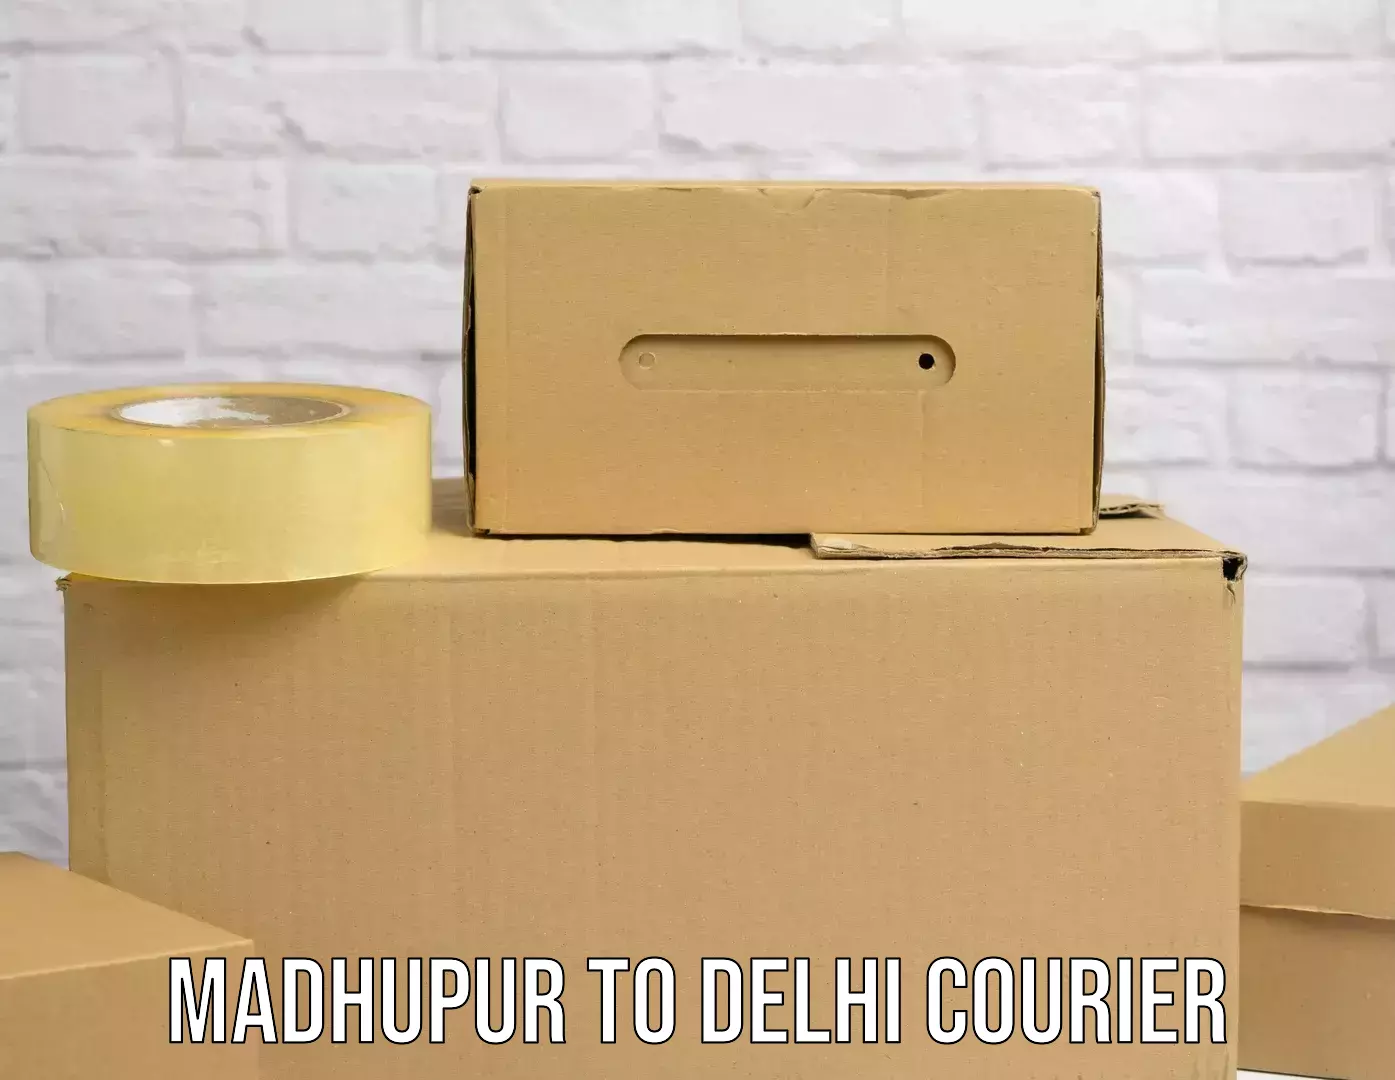 Express package services Madhupur to Indraprastha